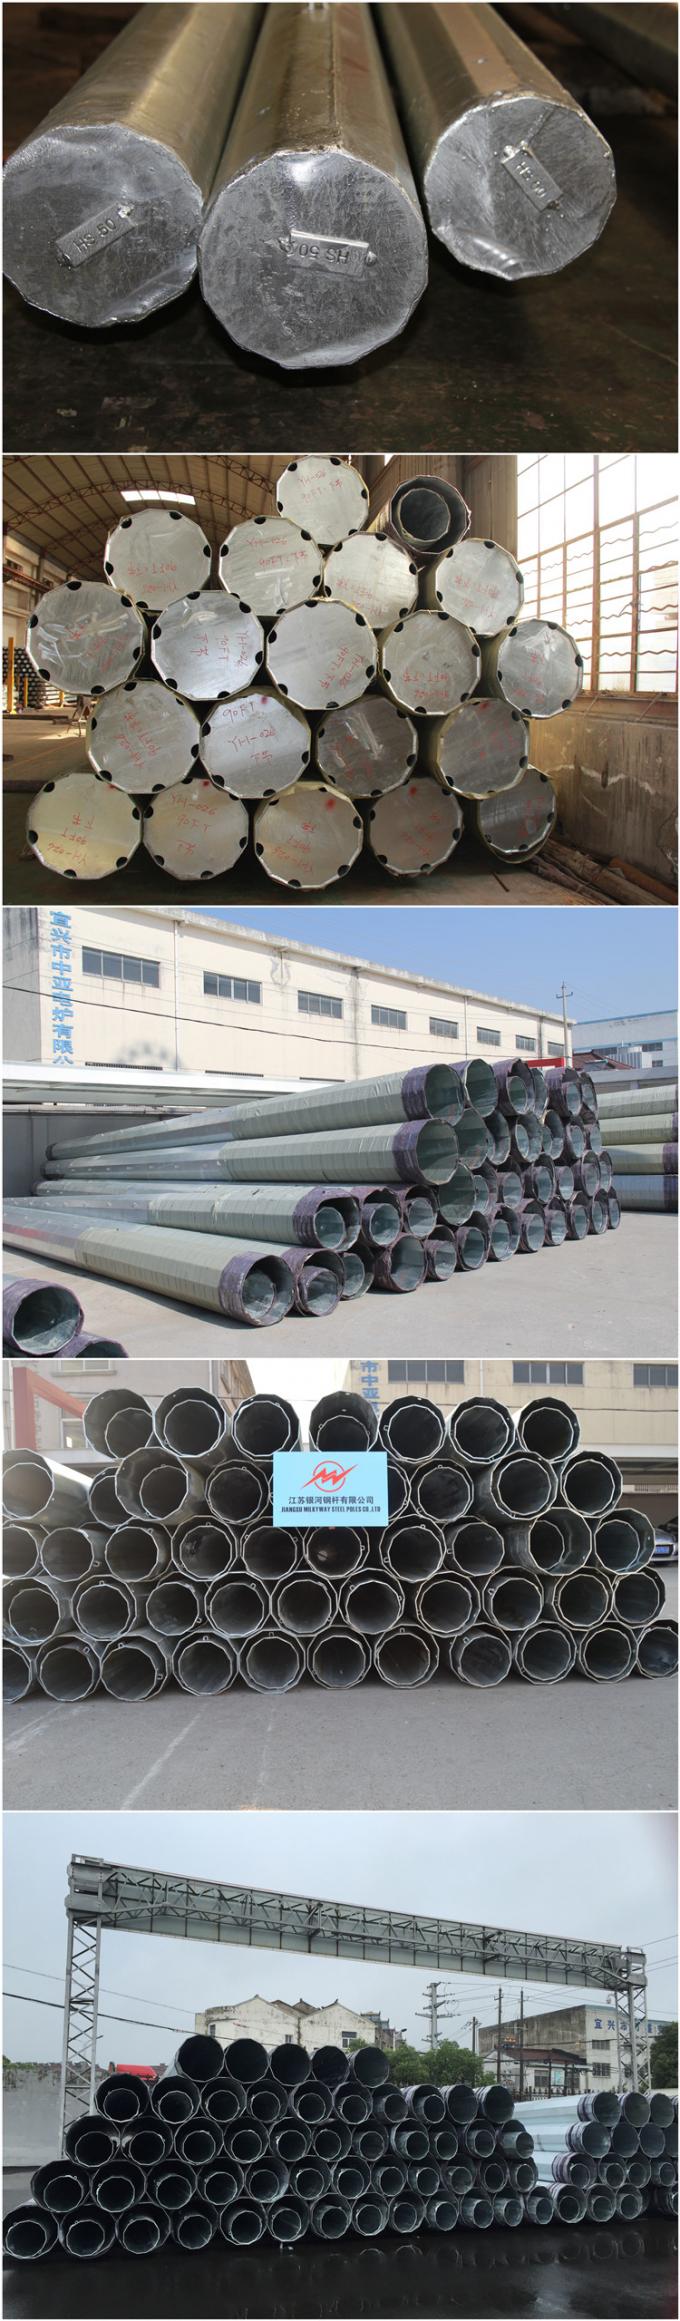 Tapered Galvanized Steel Power Pole Metal Telephone ASTM A123 1